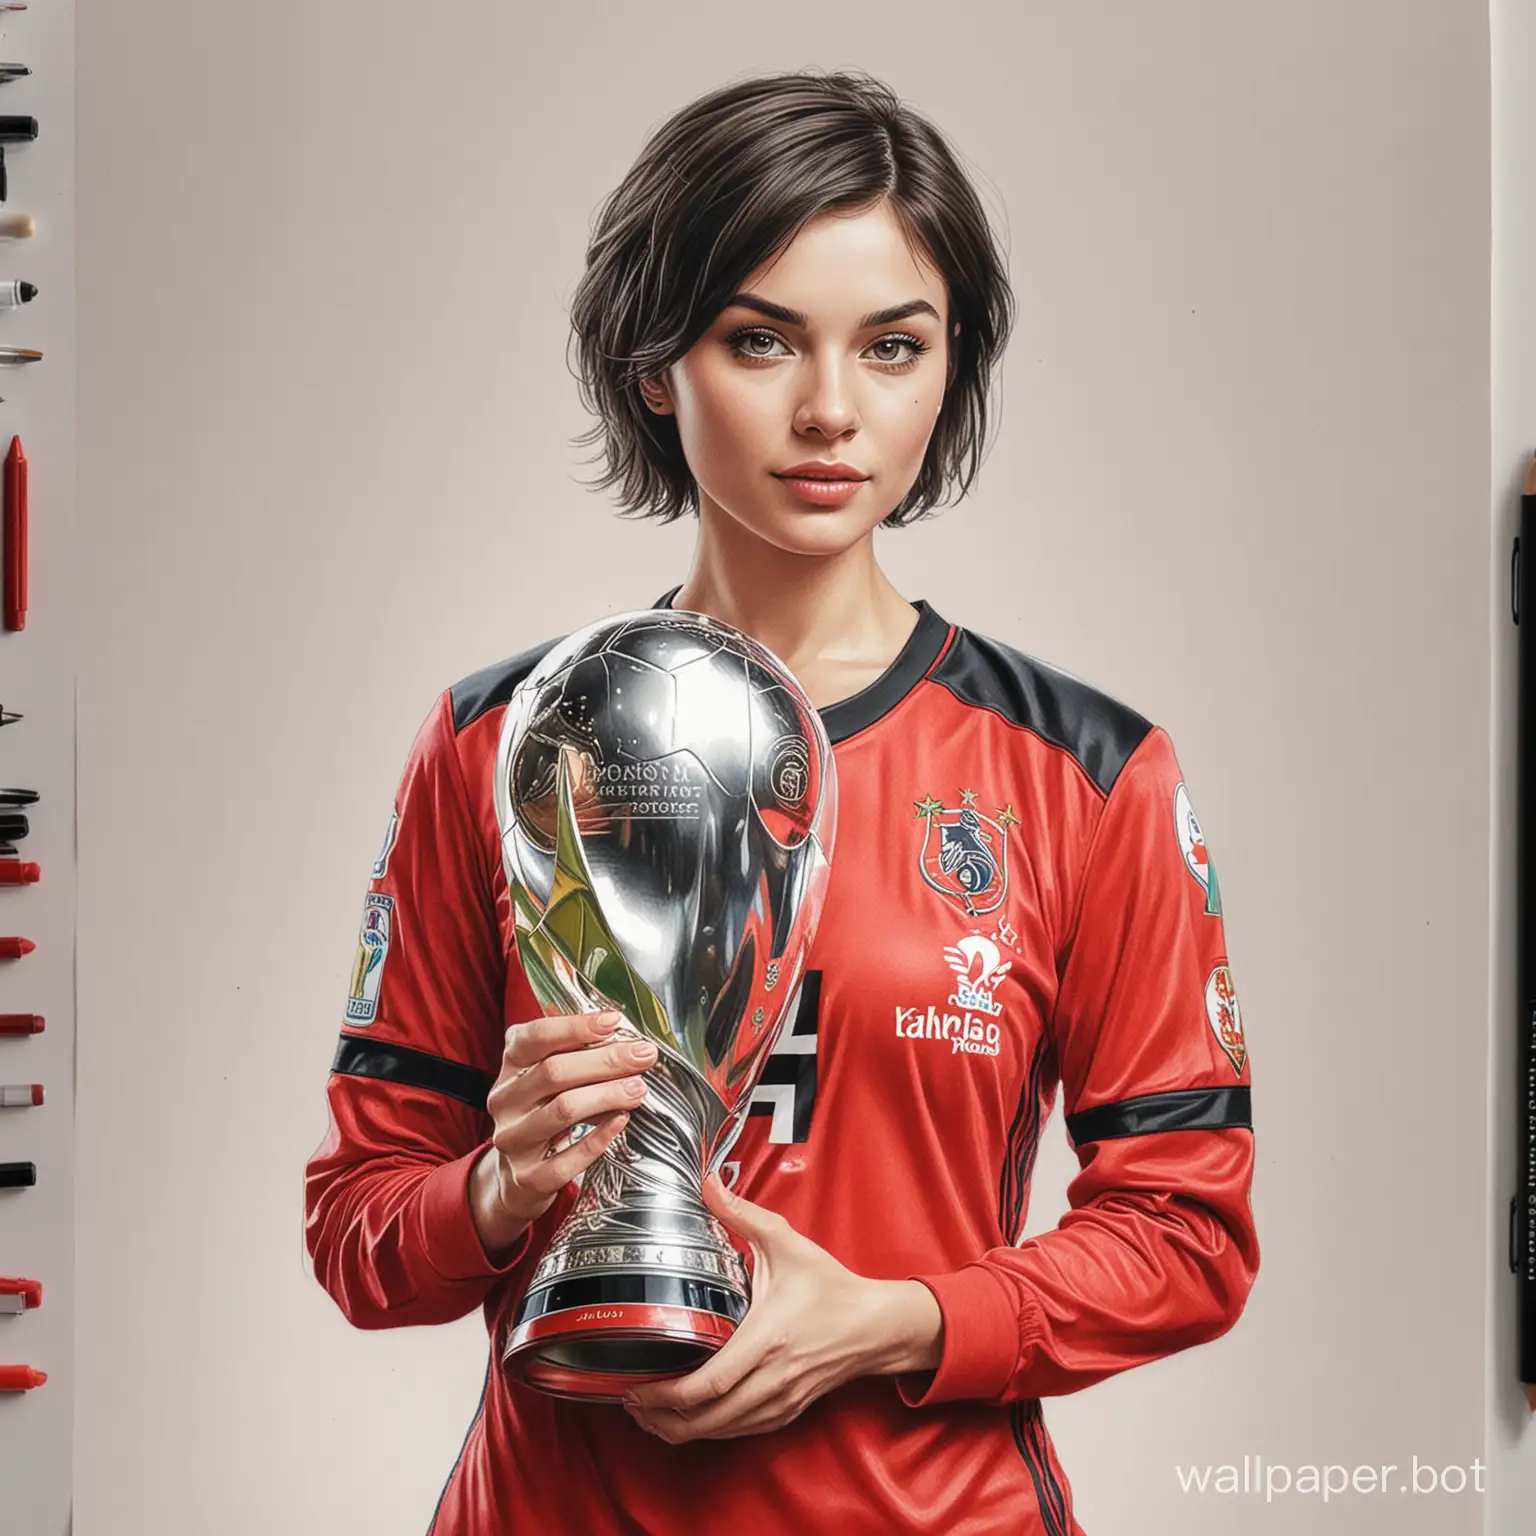 sketch Alina Lanina 25 years old dark short hair 4th breast size narrow waist in red and black football uniform holding a big Champions League cup on a white background highly realistic drawing with colored markers